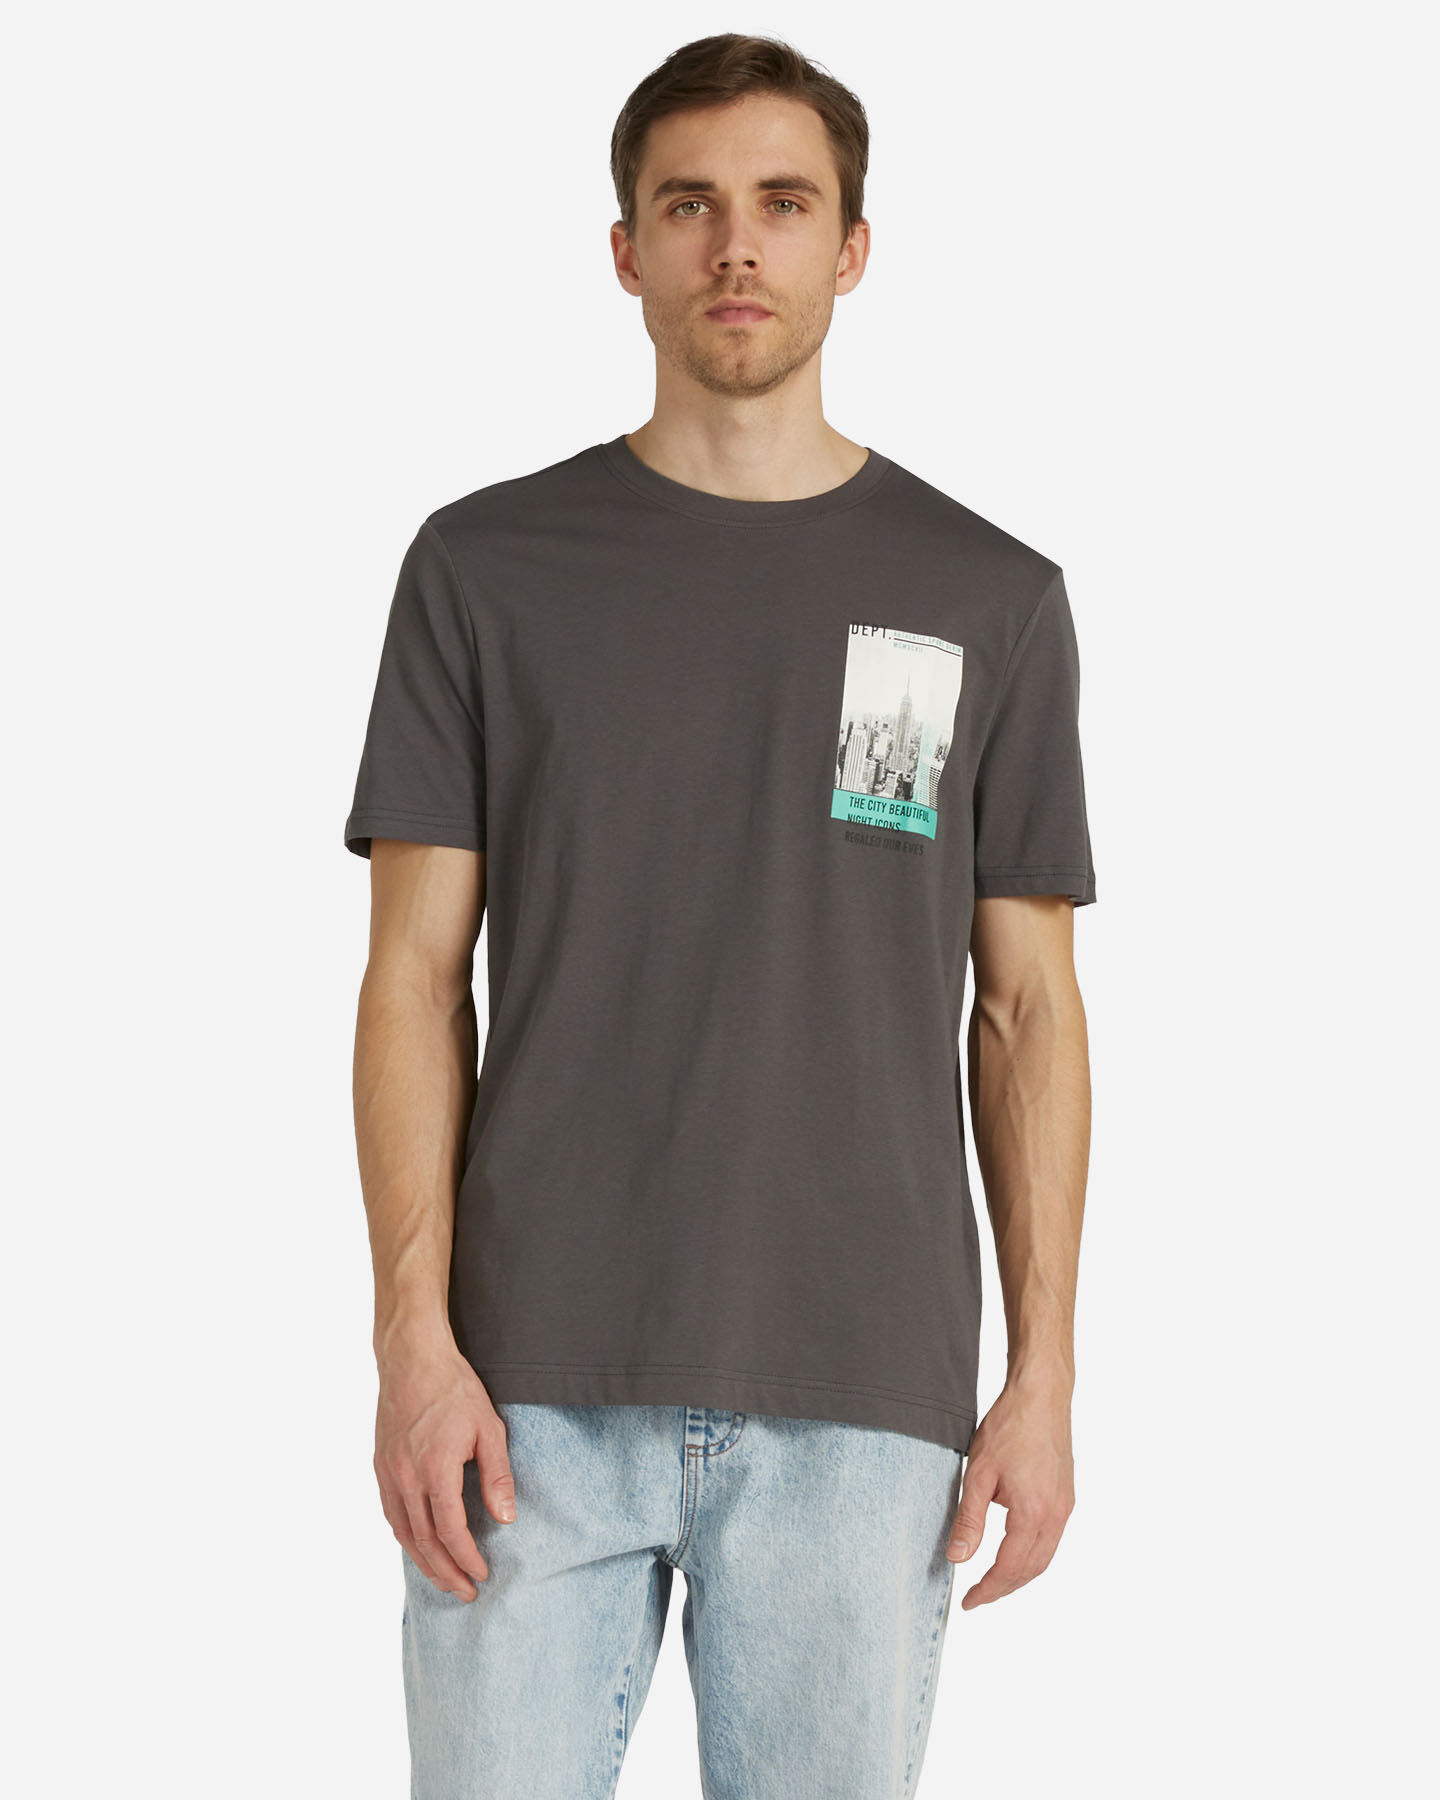  T-Shirt DACK'S ESSENTIAL M S4129631|986|S scatto 0